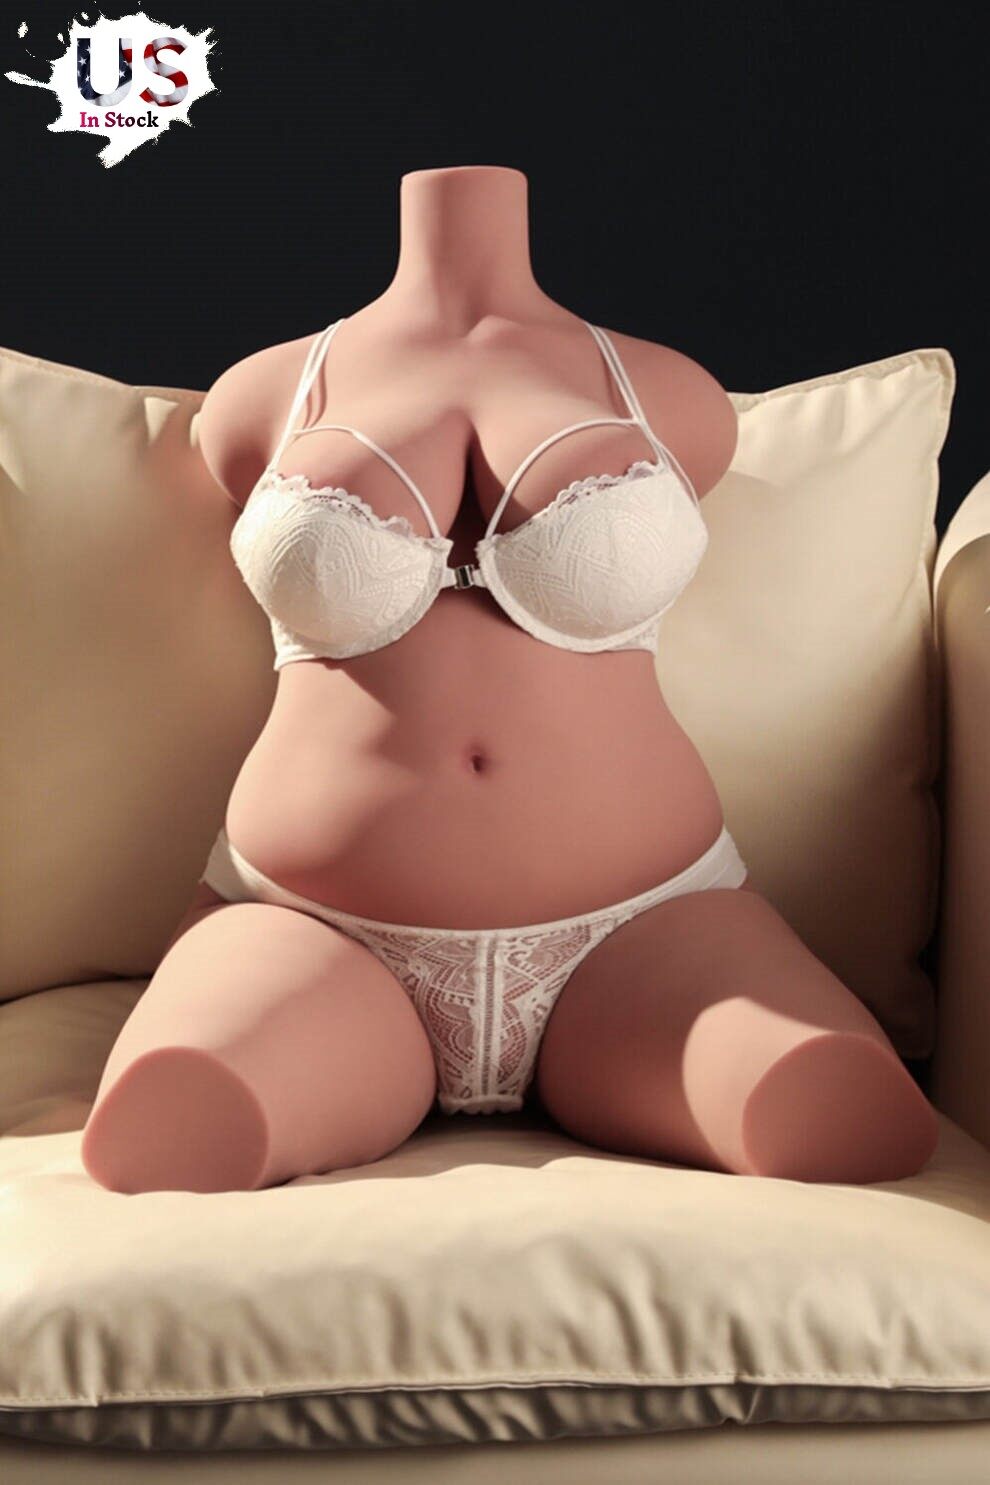 Bentleigh 90cm(2ft11) G-Cup Climax Head Beautiful Large Breast Sex Doll (US In Stock) image1